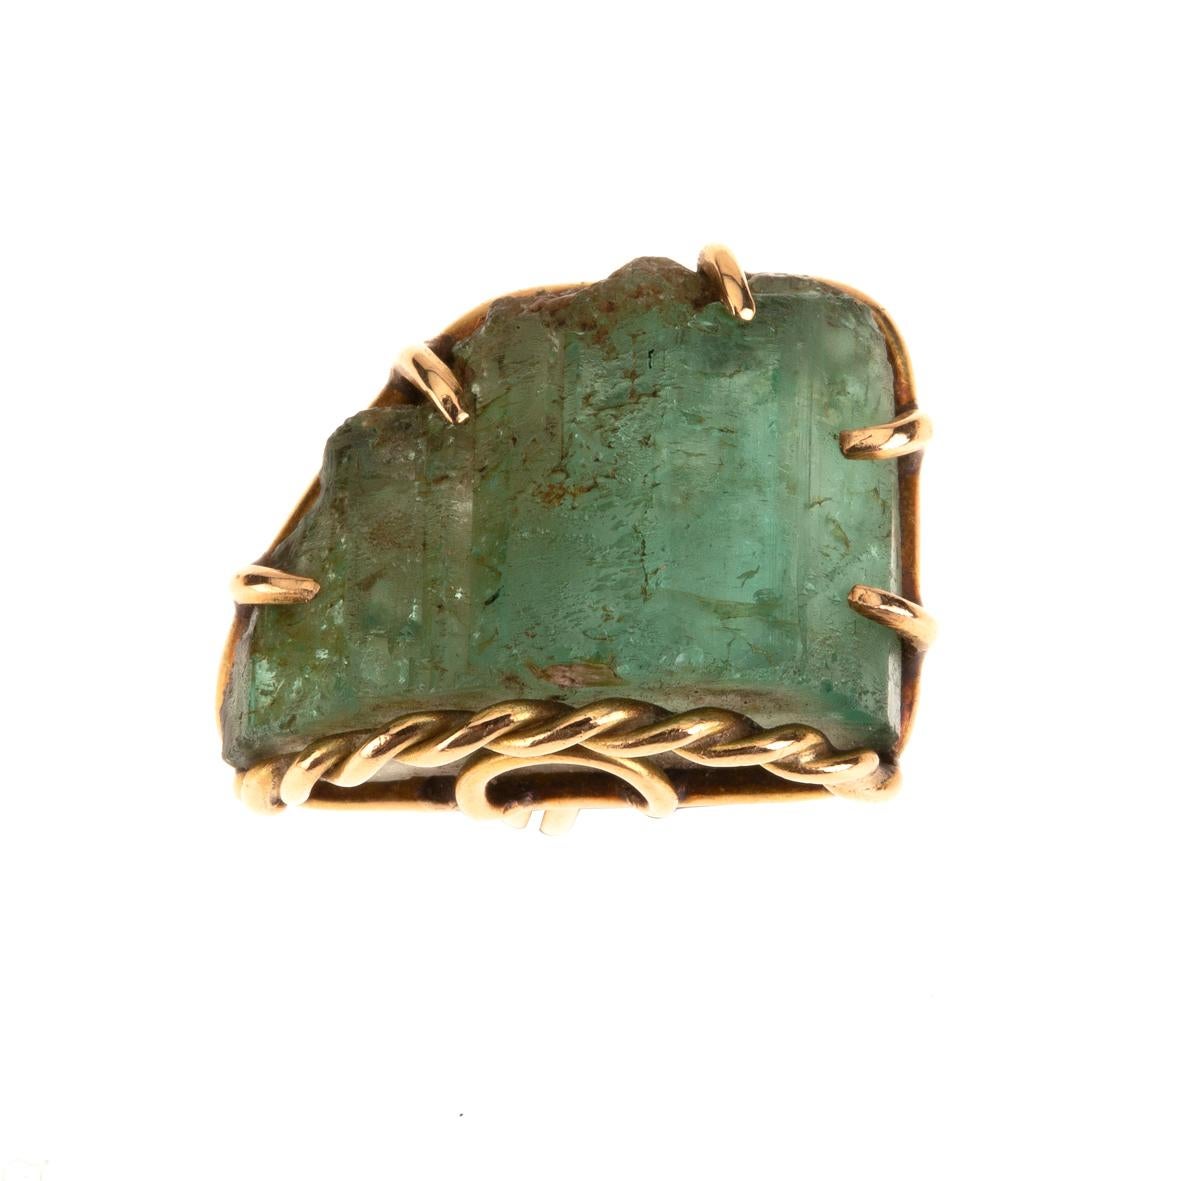 Very special and rare Row emerald cts 24 ring ,  18 k yellow gold gr 14 very refined , size 13 eu.
All Giulia Colussi jewelry is new and has never been previously owned or worn. Each item will arrive at your door beautifully gift wrapped in our